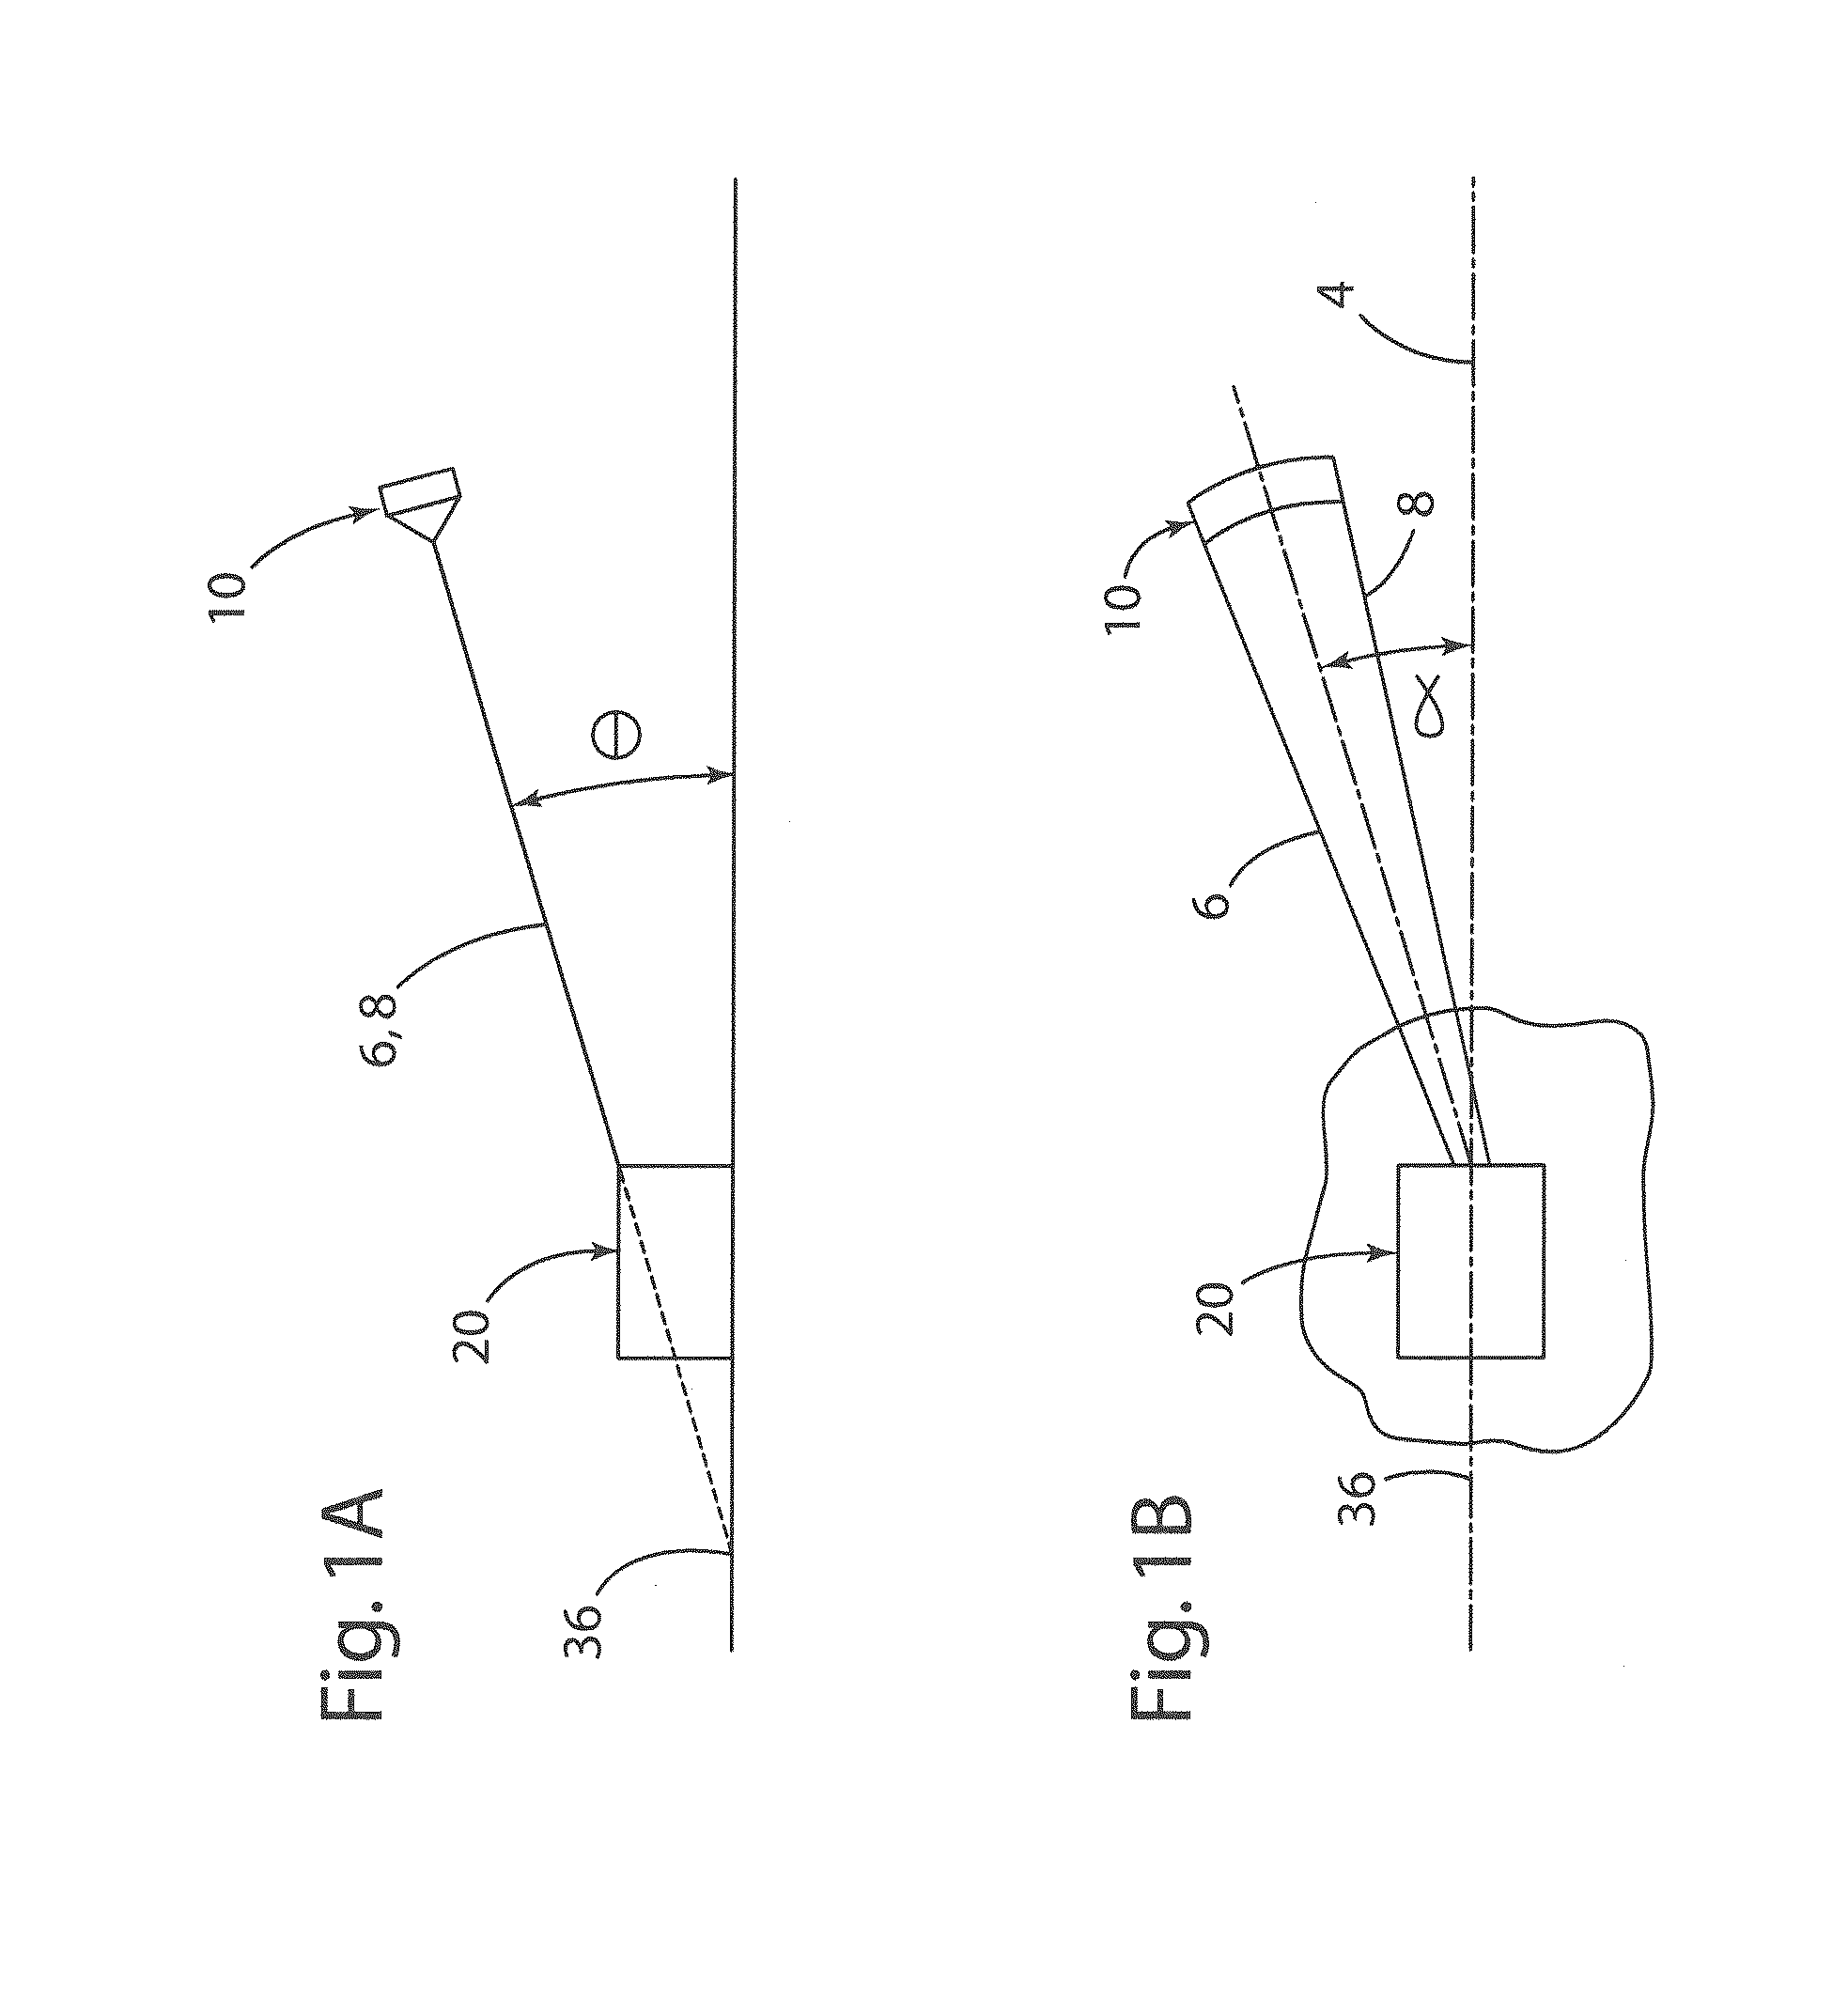 Tethered vehicle control and tracking system